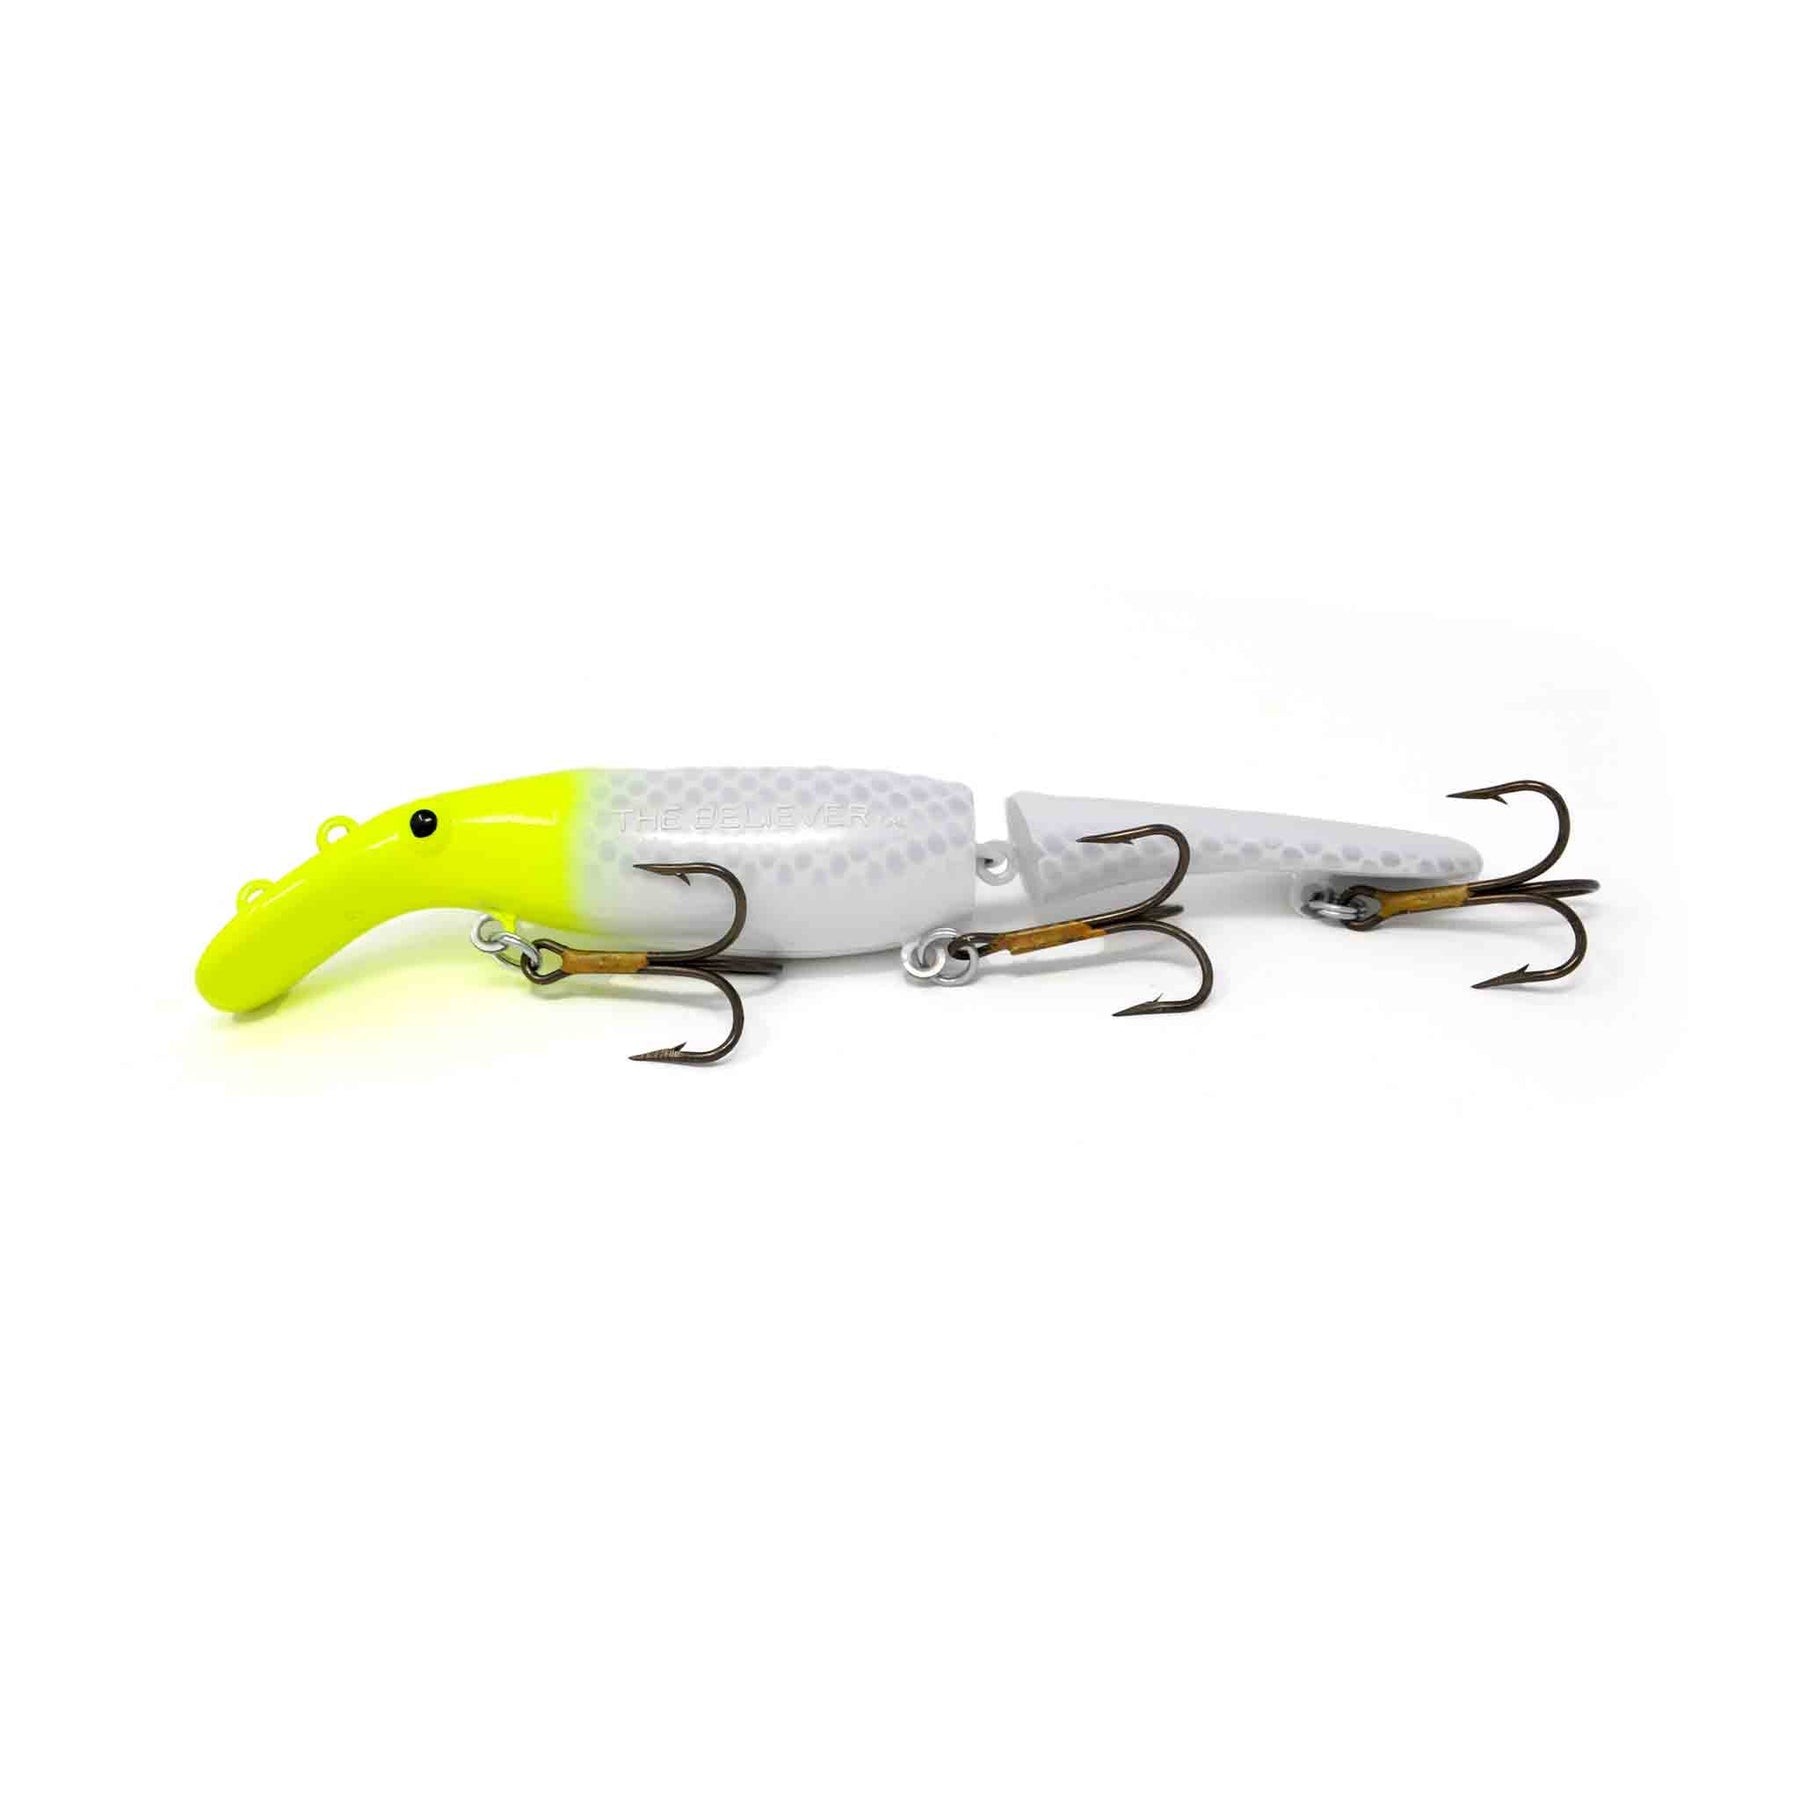 The Believer Musky Fishing Lure